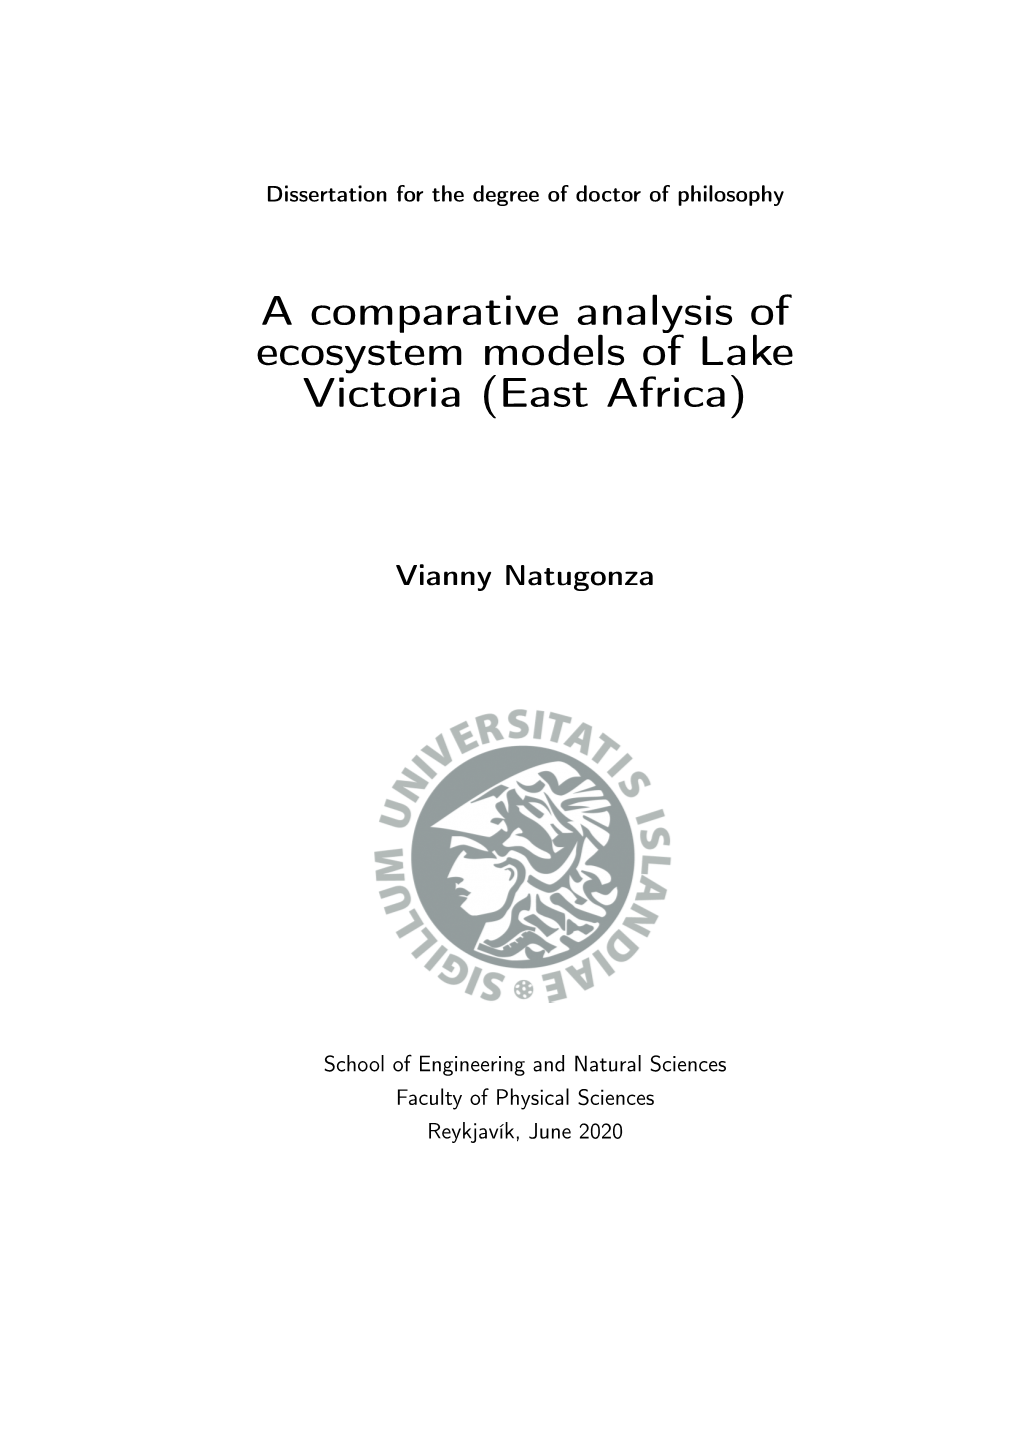 A Comparative Analysis of Ecosystem Models of Lake Victoria (East Africa)